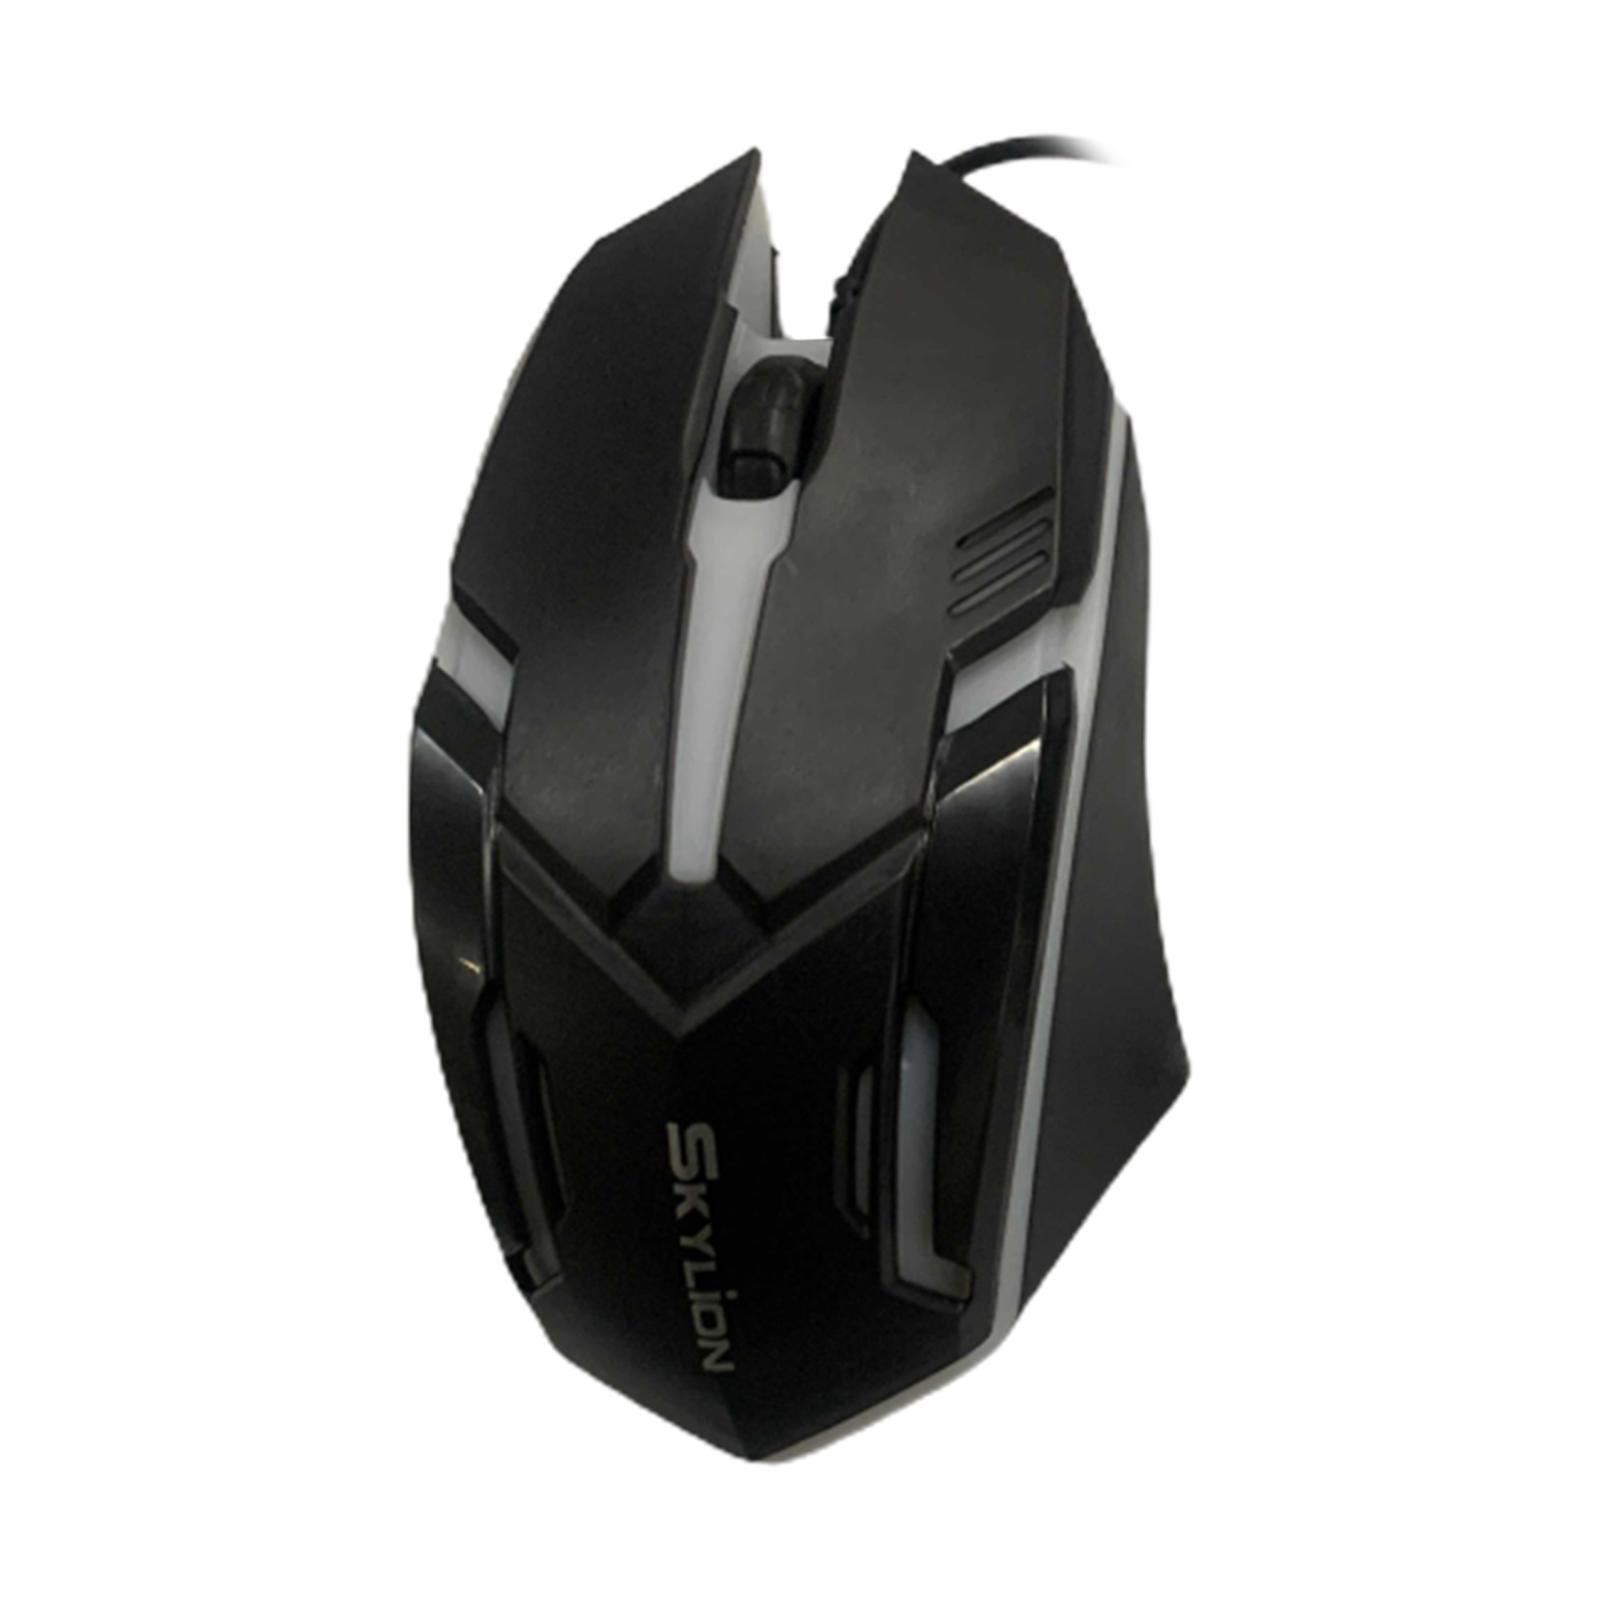 Gaming Wired 1600 DPI Computer Mice Laptop for Windows 7/8/10/XP Vista